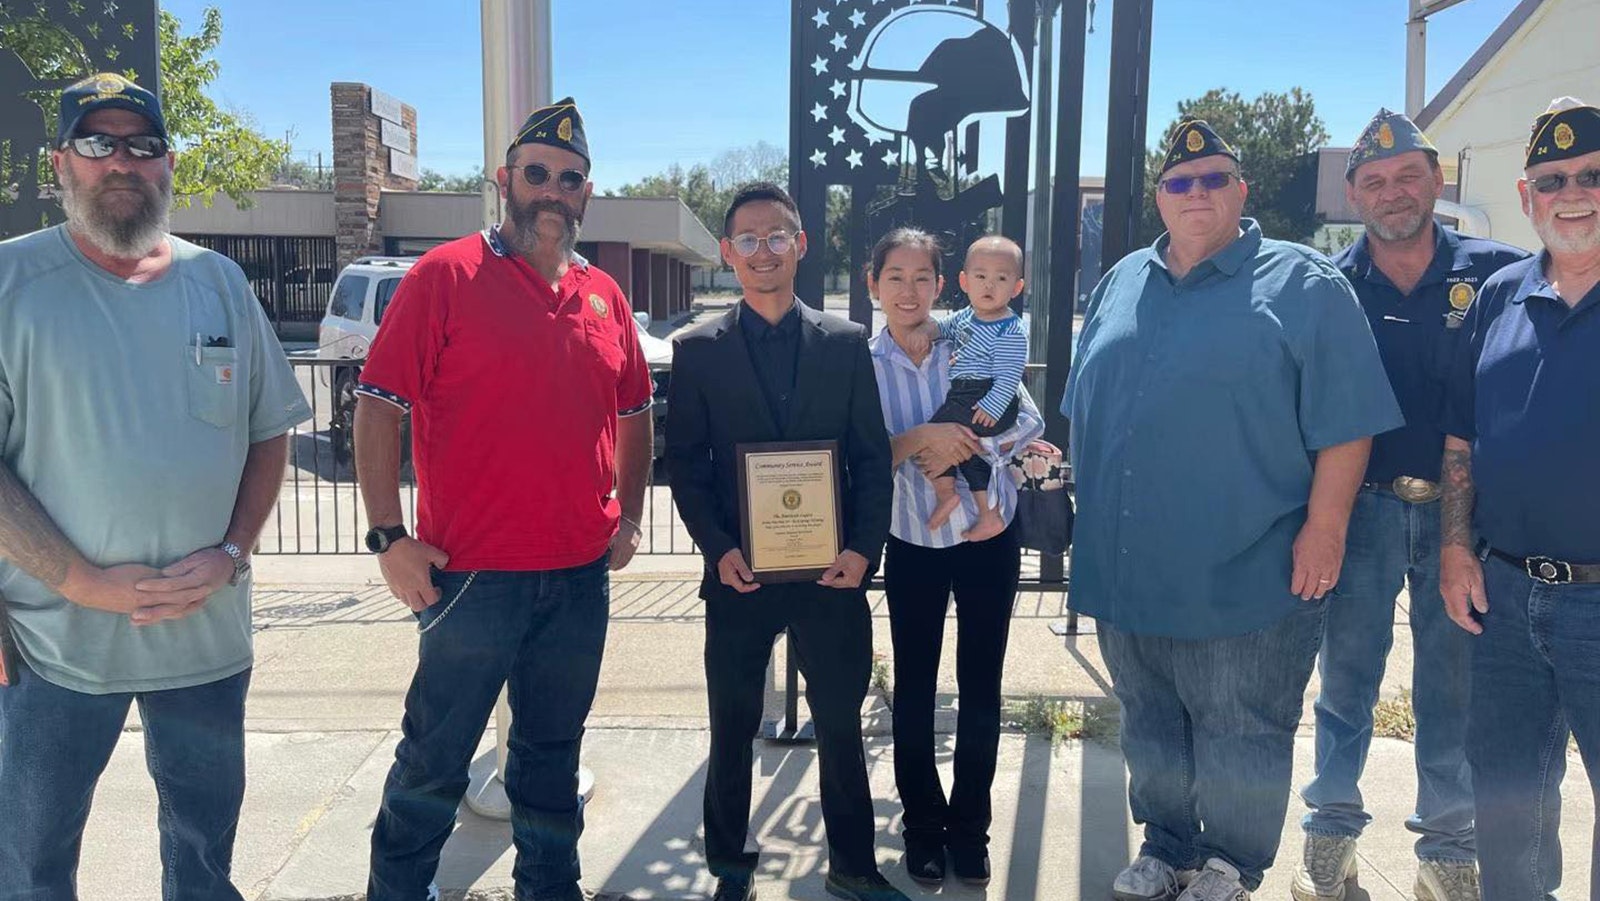 Jerry Zhang and his wife accept a Community Spirit Award in Rock Springs.